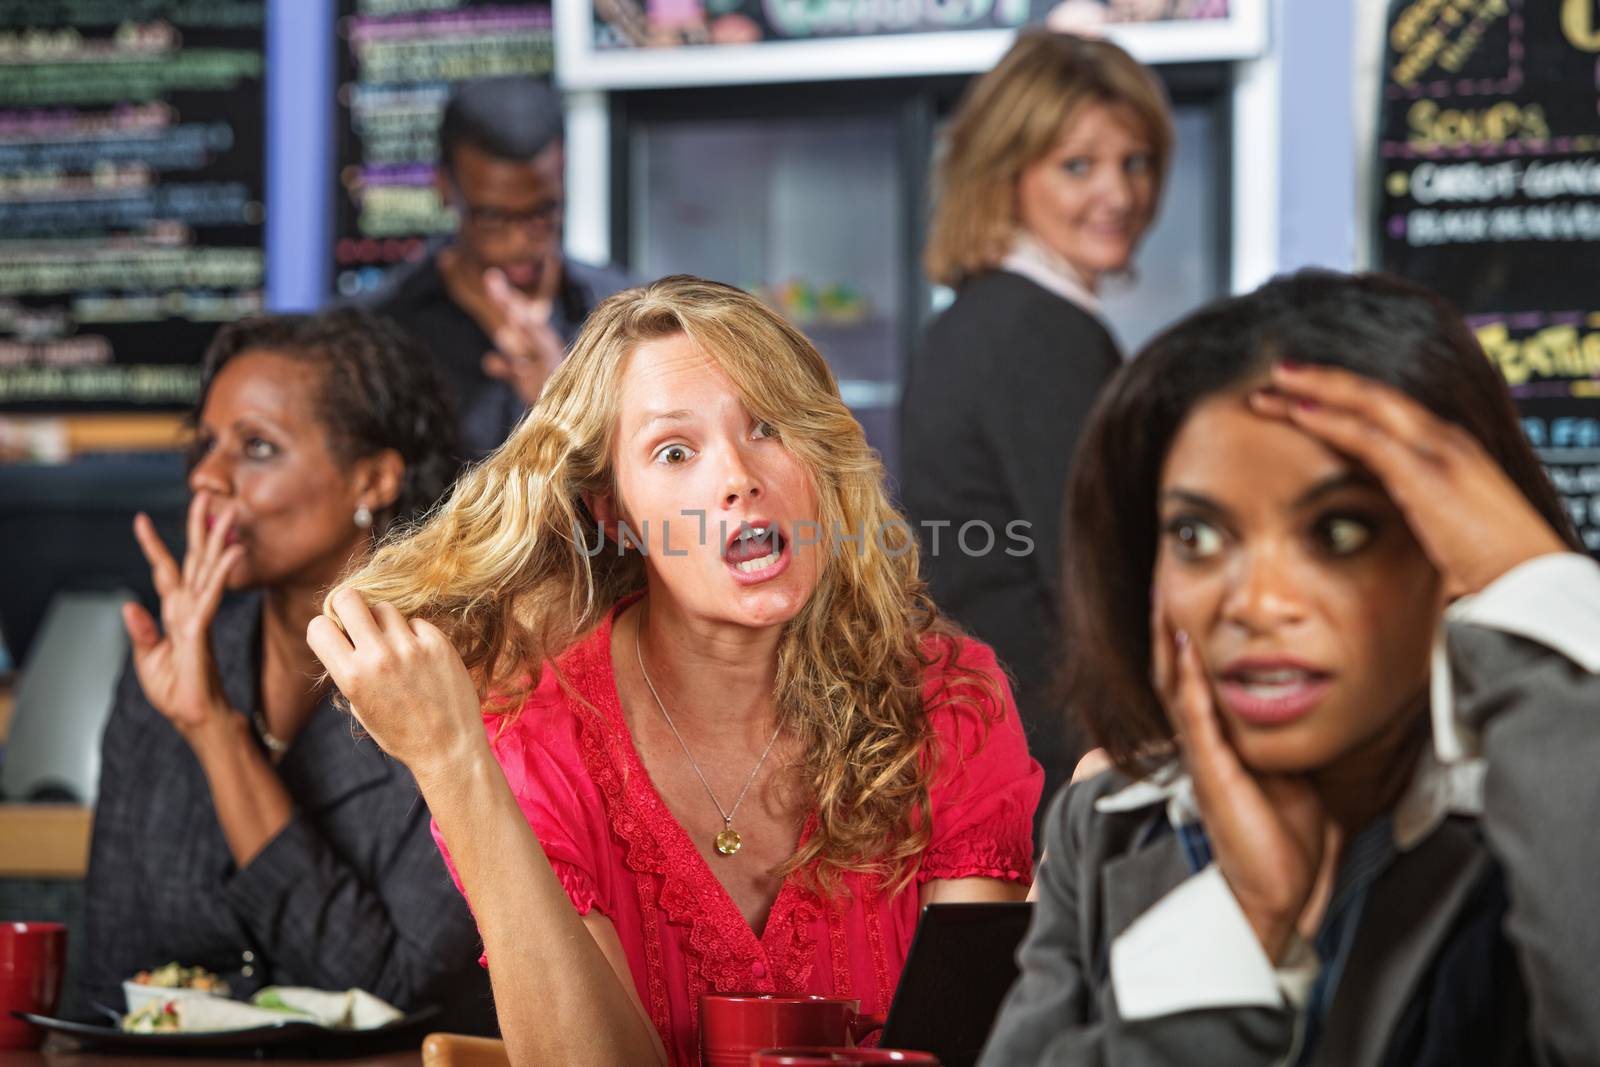 Emotional woman pulling hair in cafe with embarrassed friend